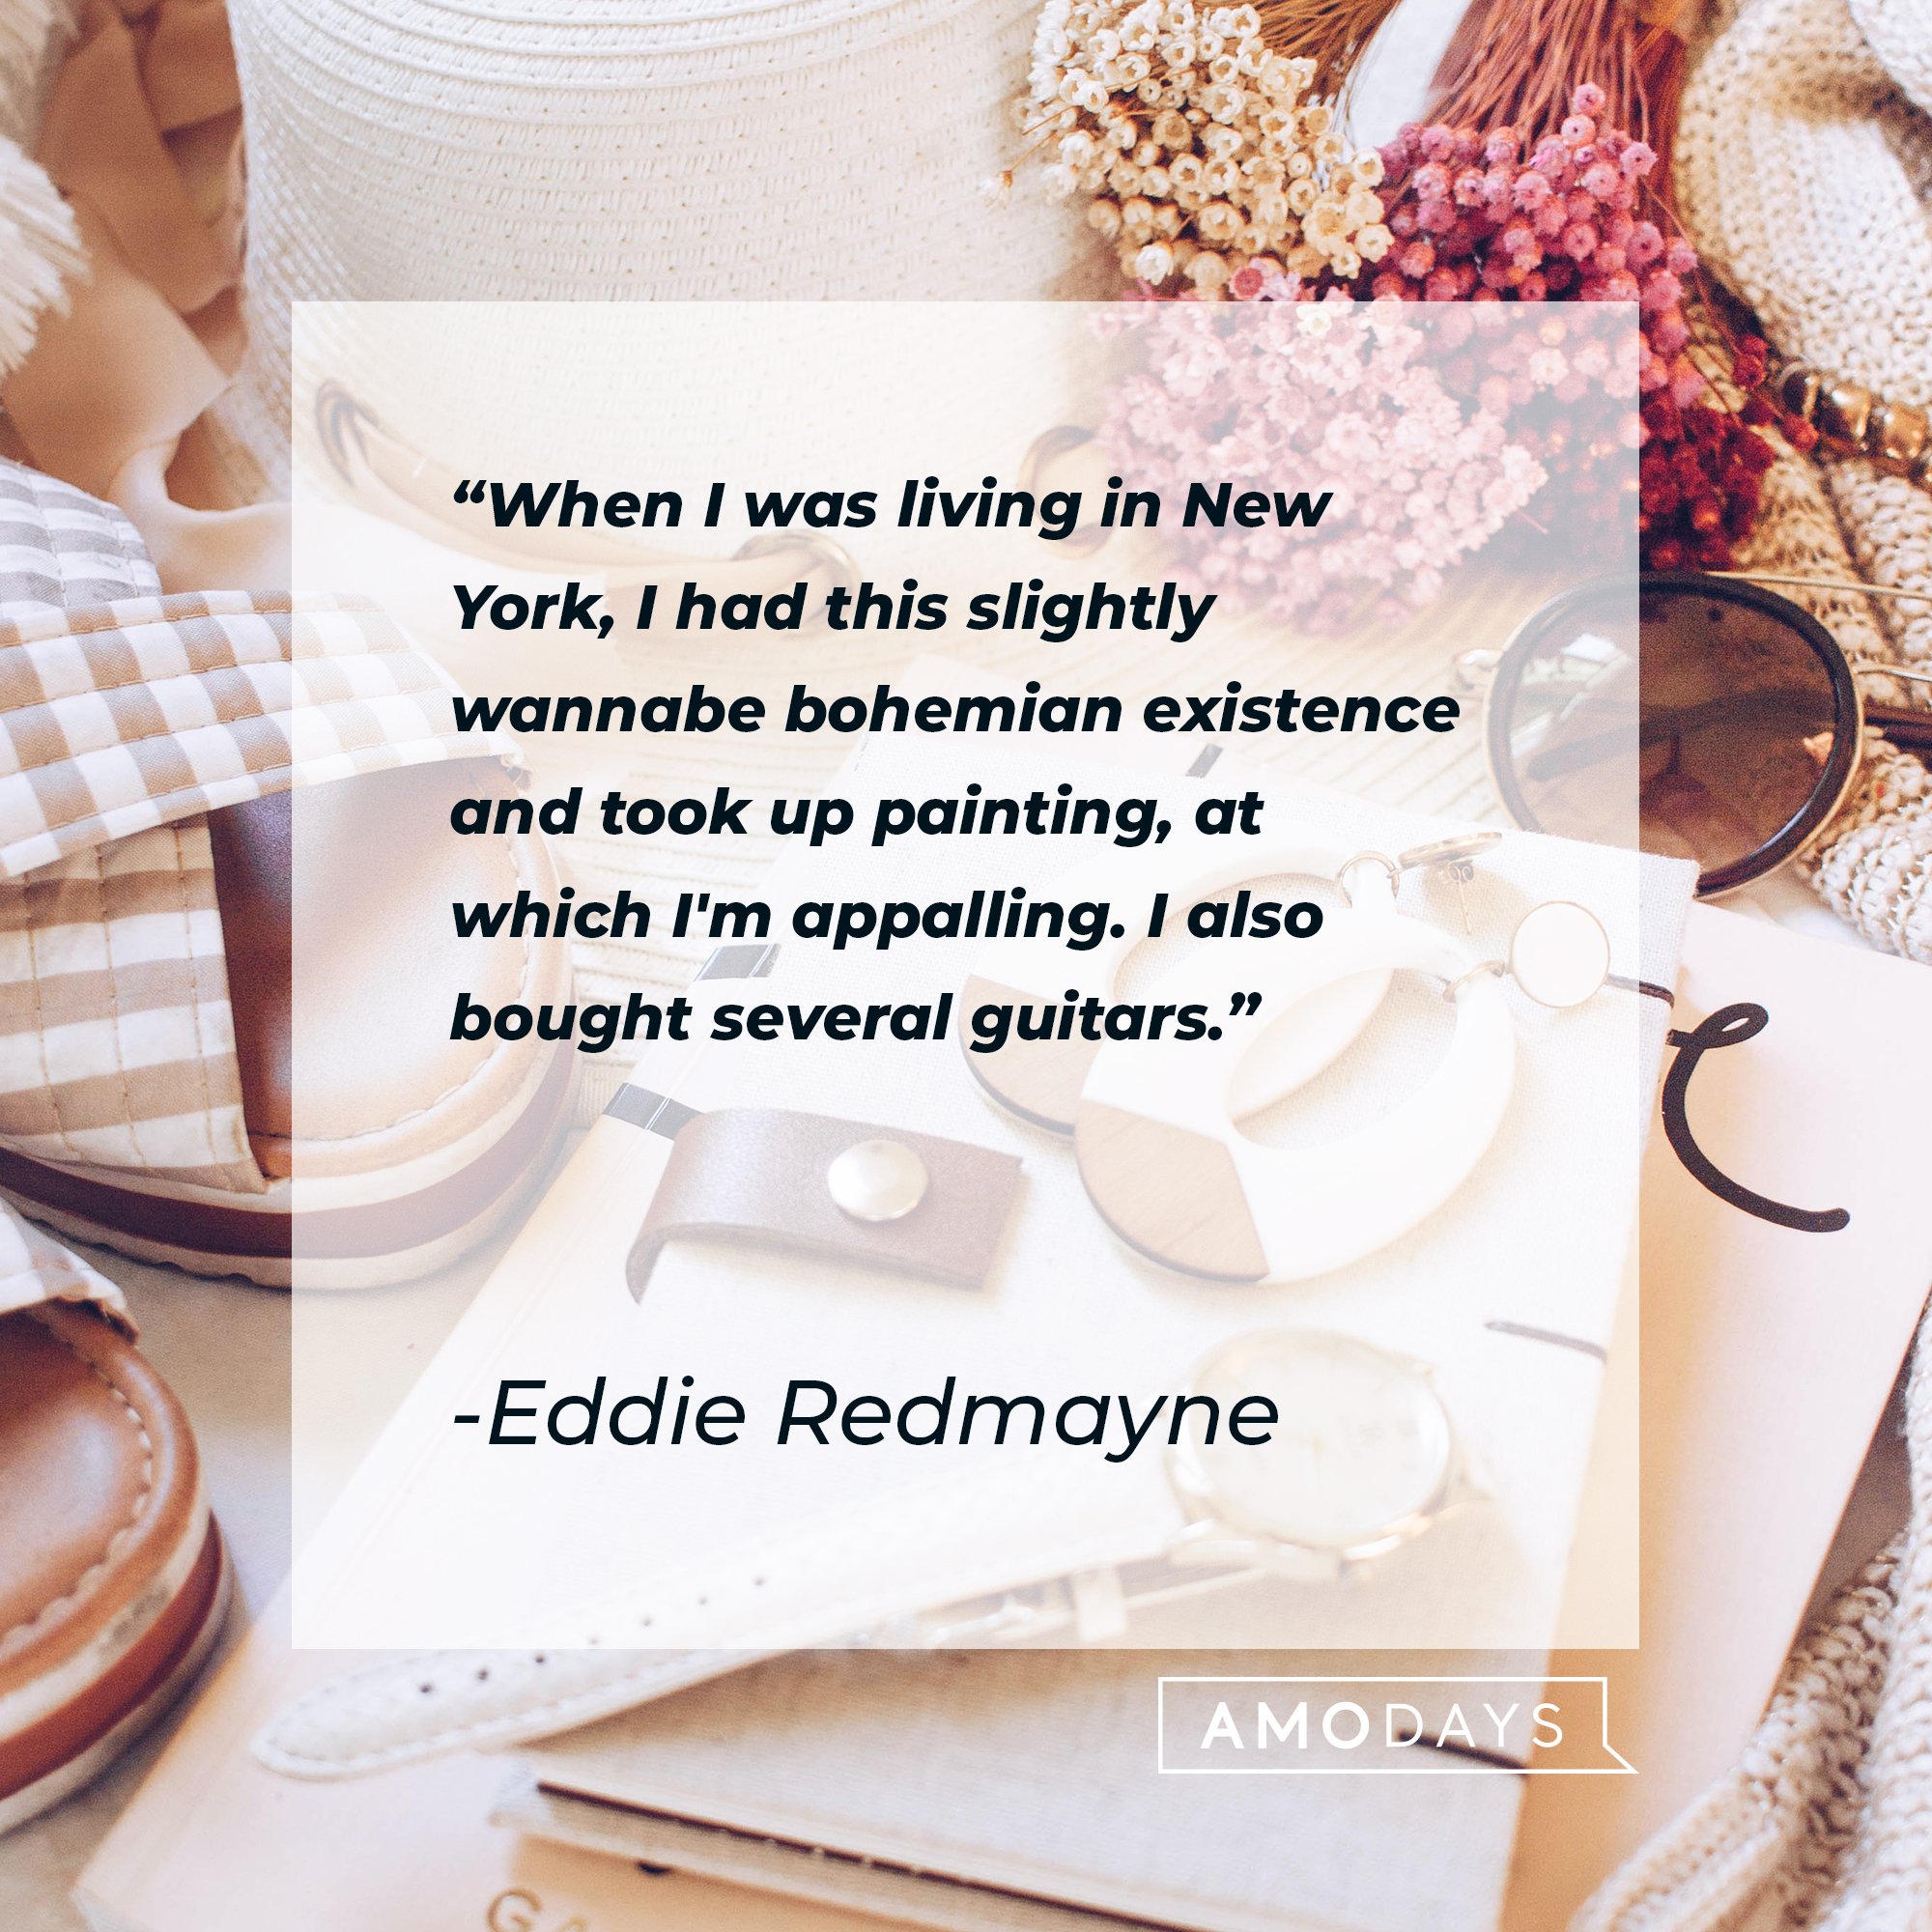 Eddie Redmayne's quote: "When I was living in New York, I had this slightly wannabe bohemian existence and took up painting, at which I'm appalling. I also bought several guitars." | Image: AmoDays  